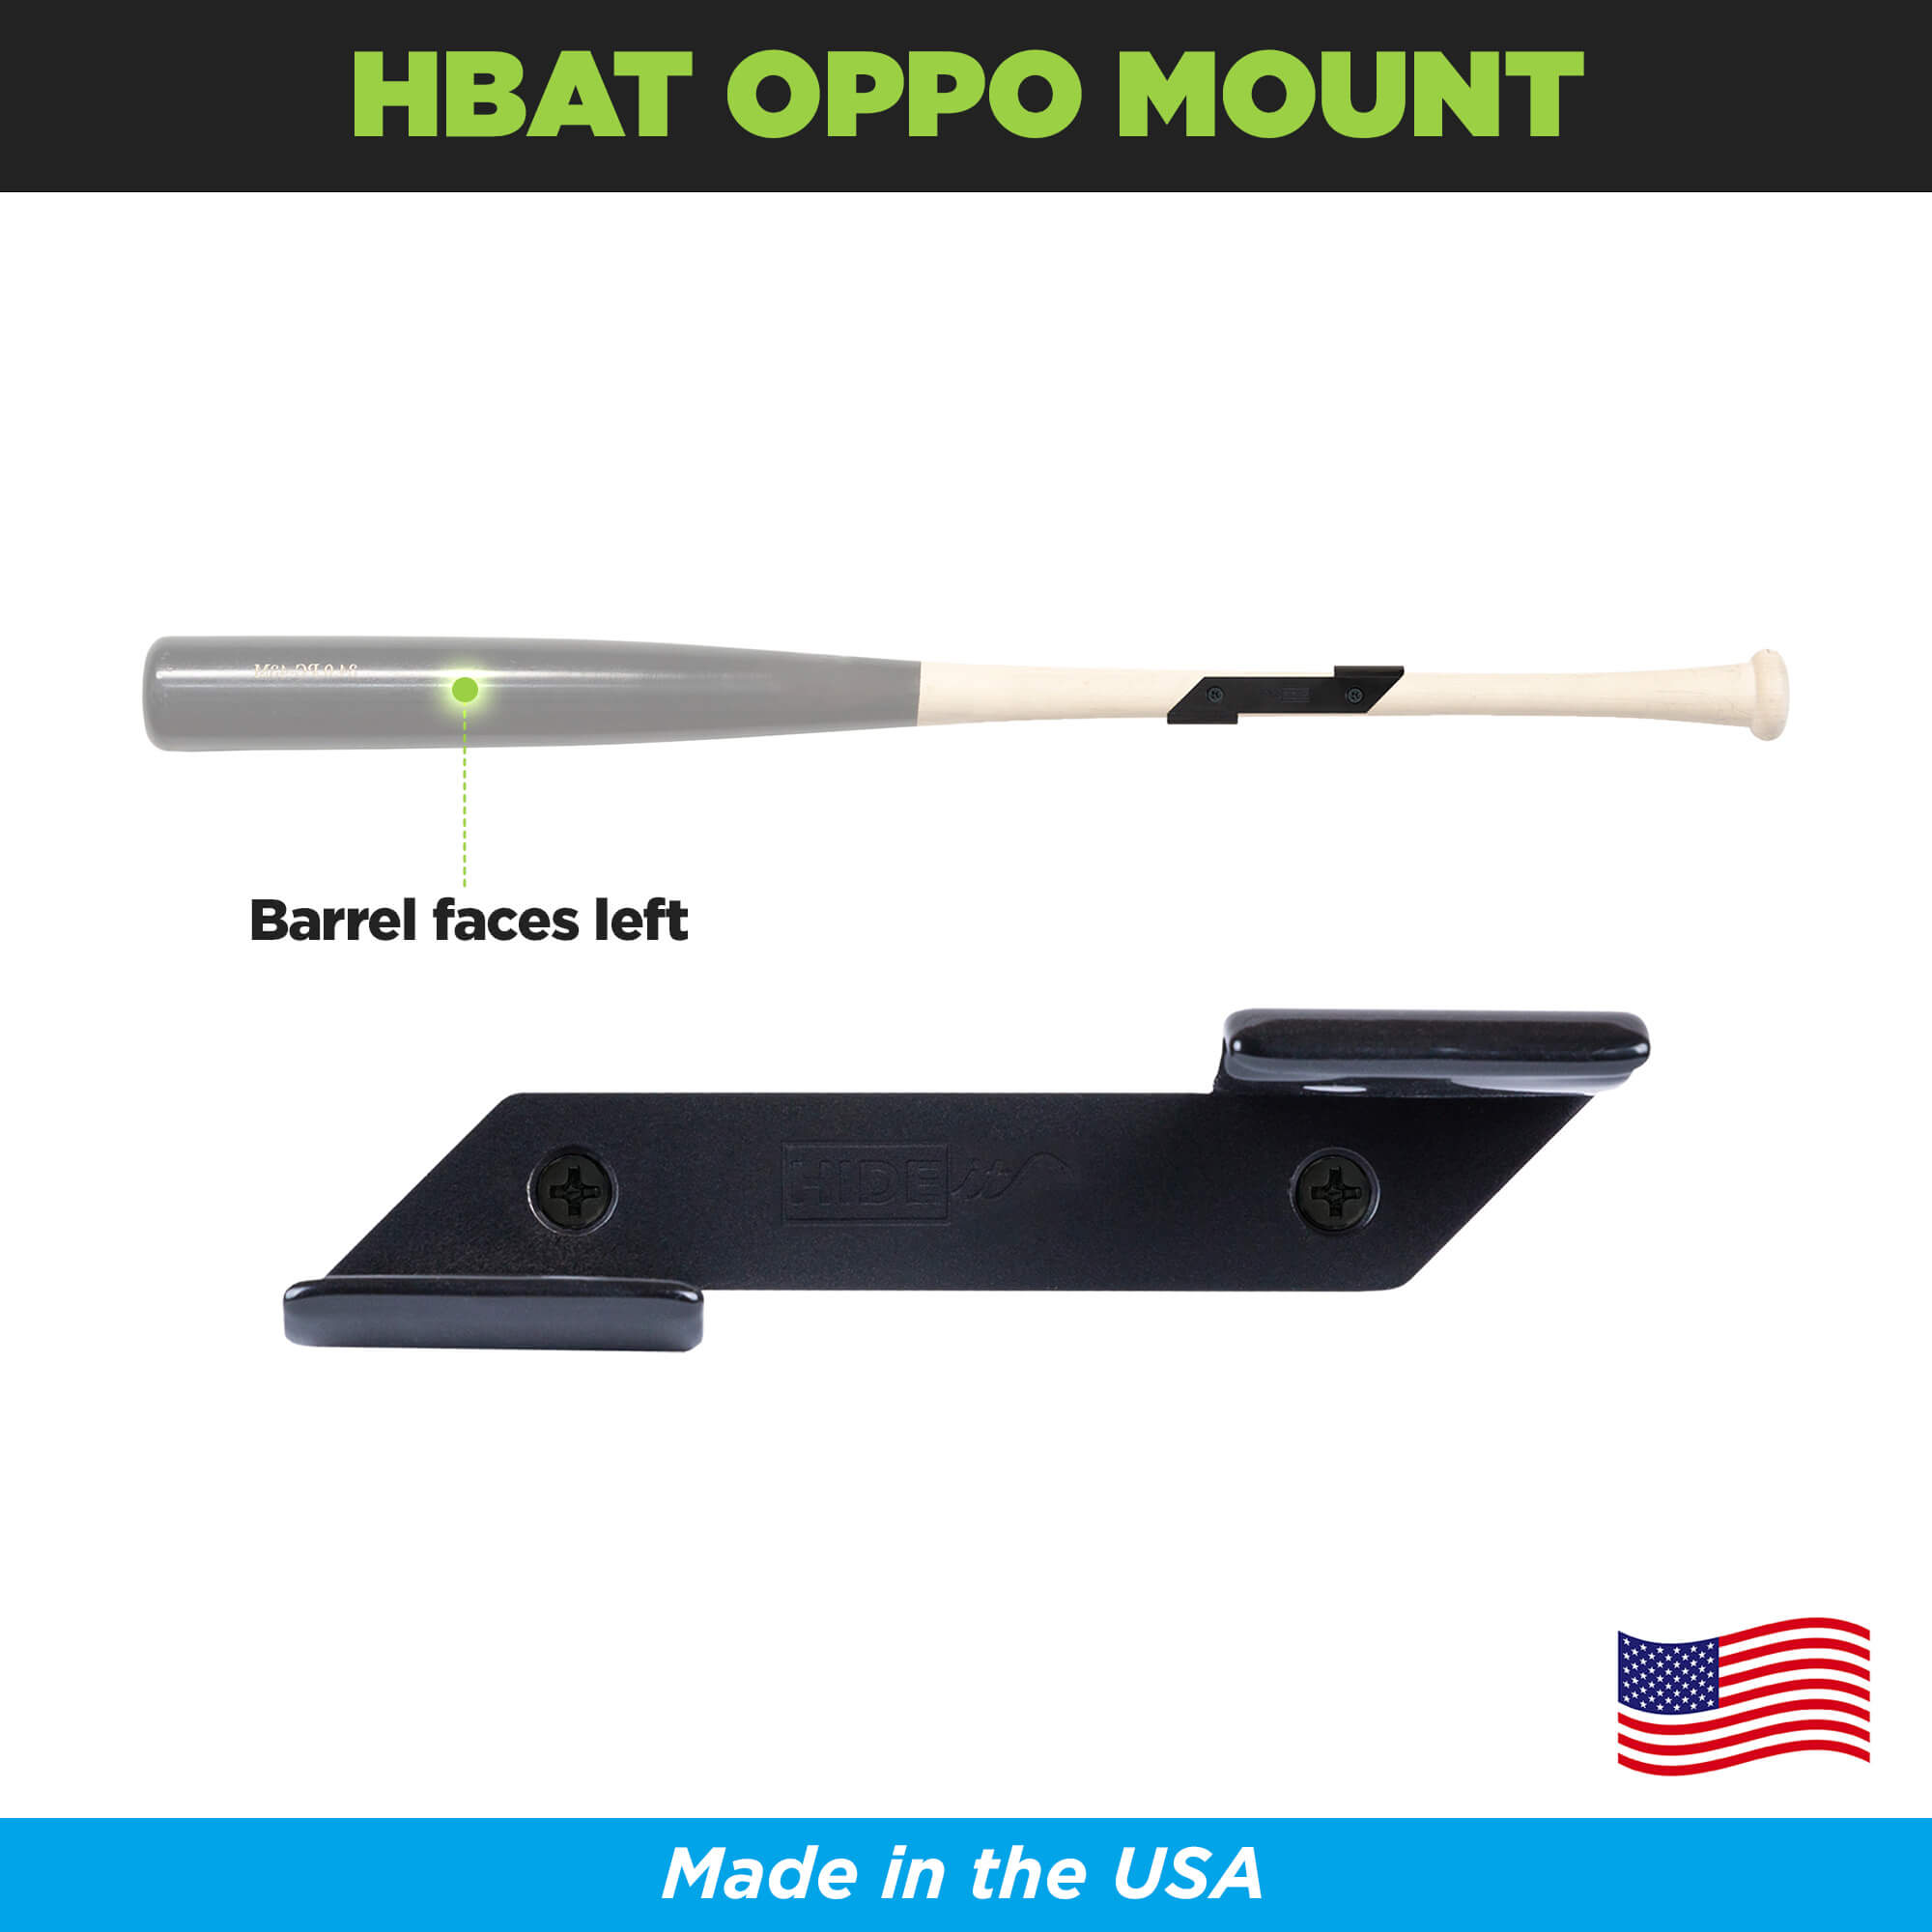 HIDEit Mounts HBat Oppo Mount. This Horizontal Left-Facing Baseball Bat Mount is Made in America by an American Company.